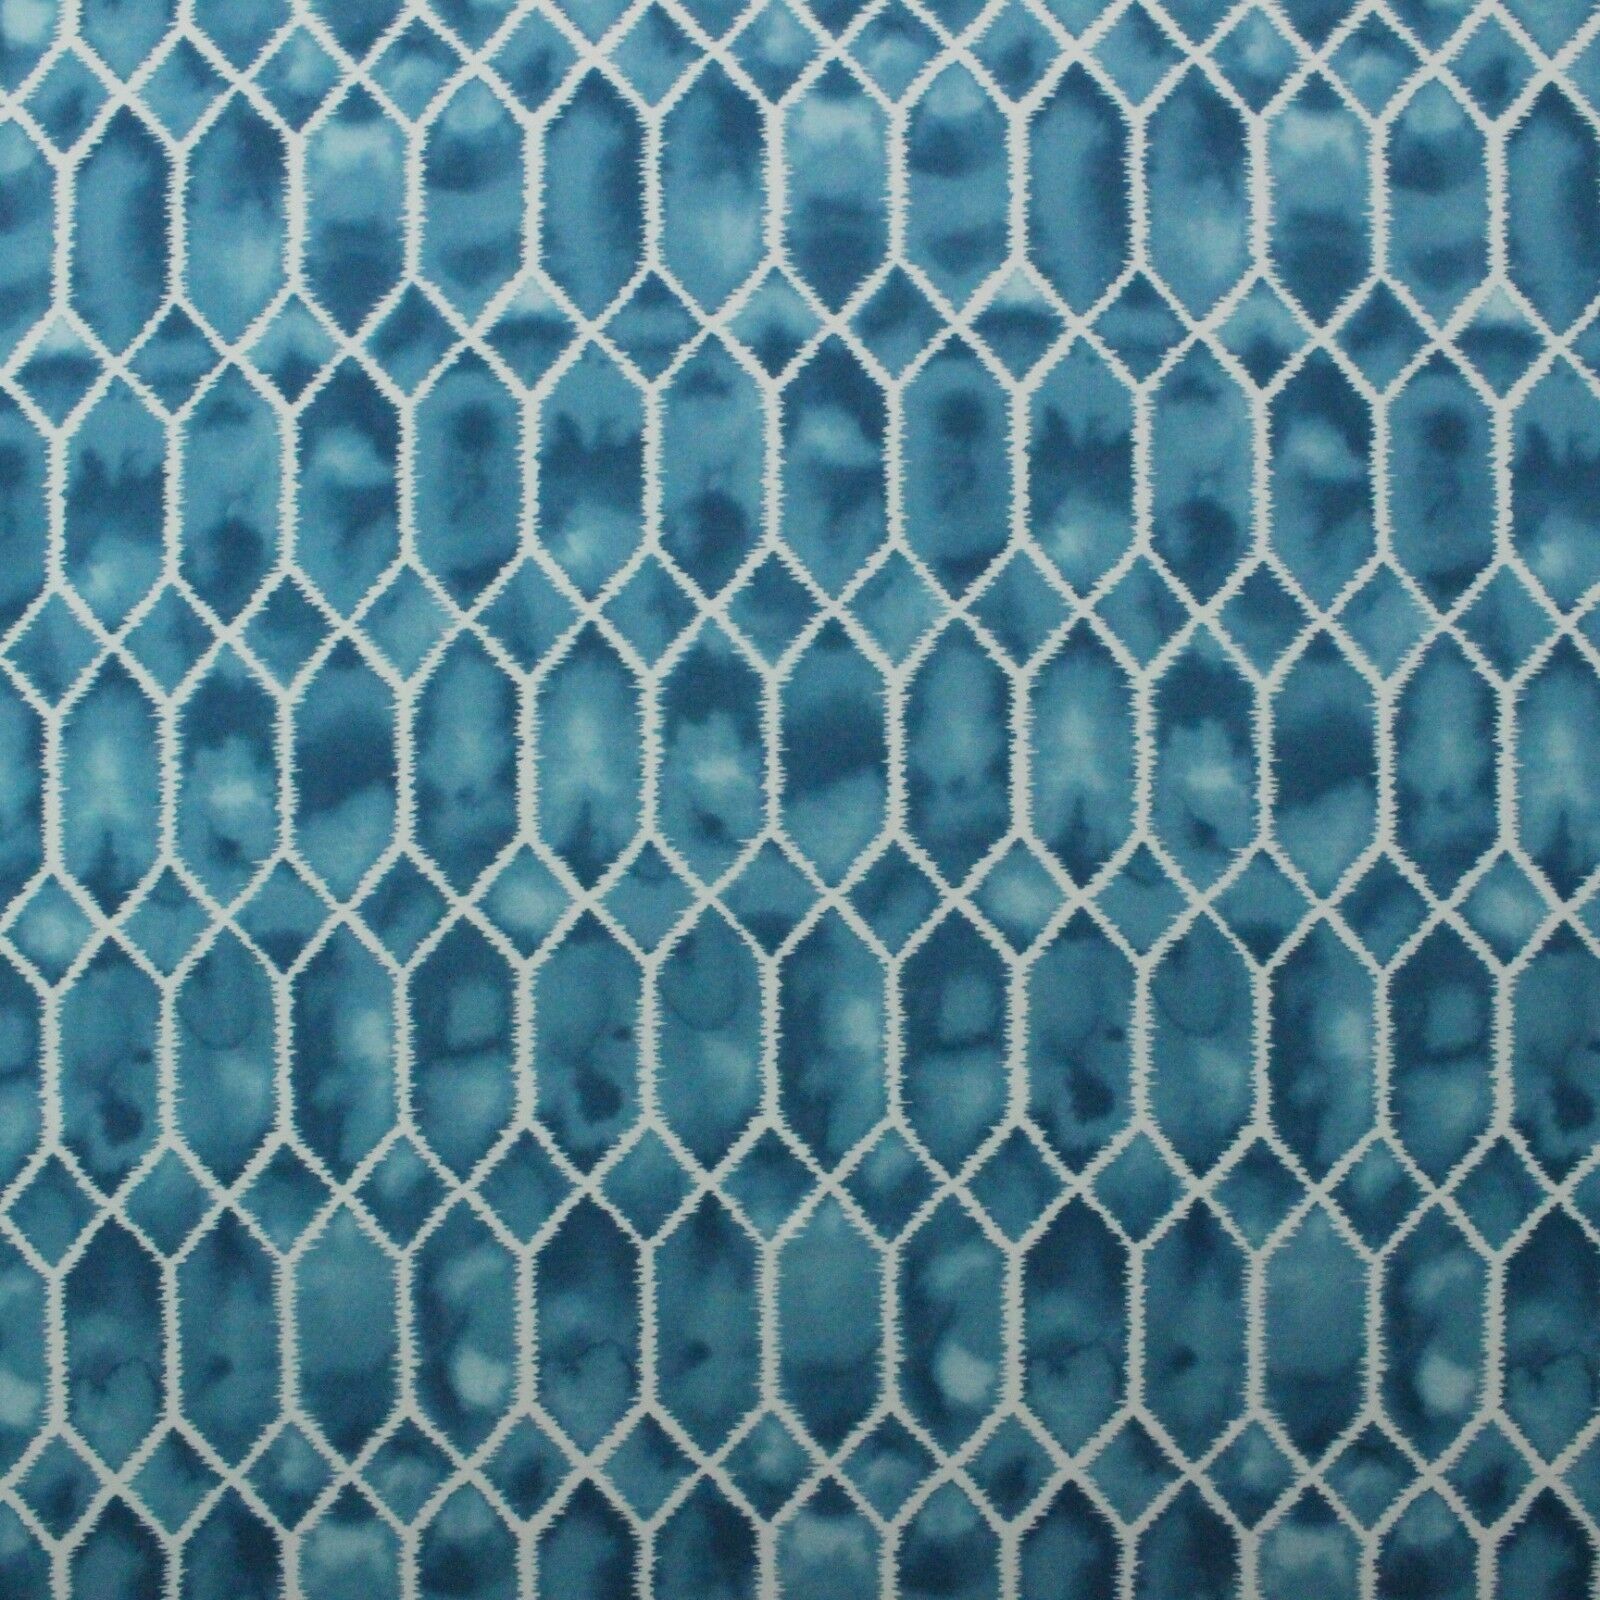 Primary image for P KAUFMANN GEM AQUA BLUE WATERCOLOR EFFECT MULTIUSE COTTON FABRIC BY YARD 54"W